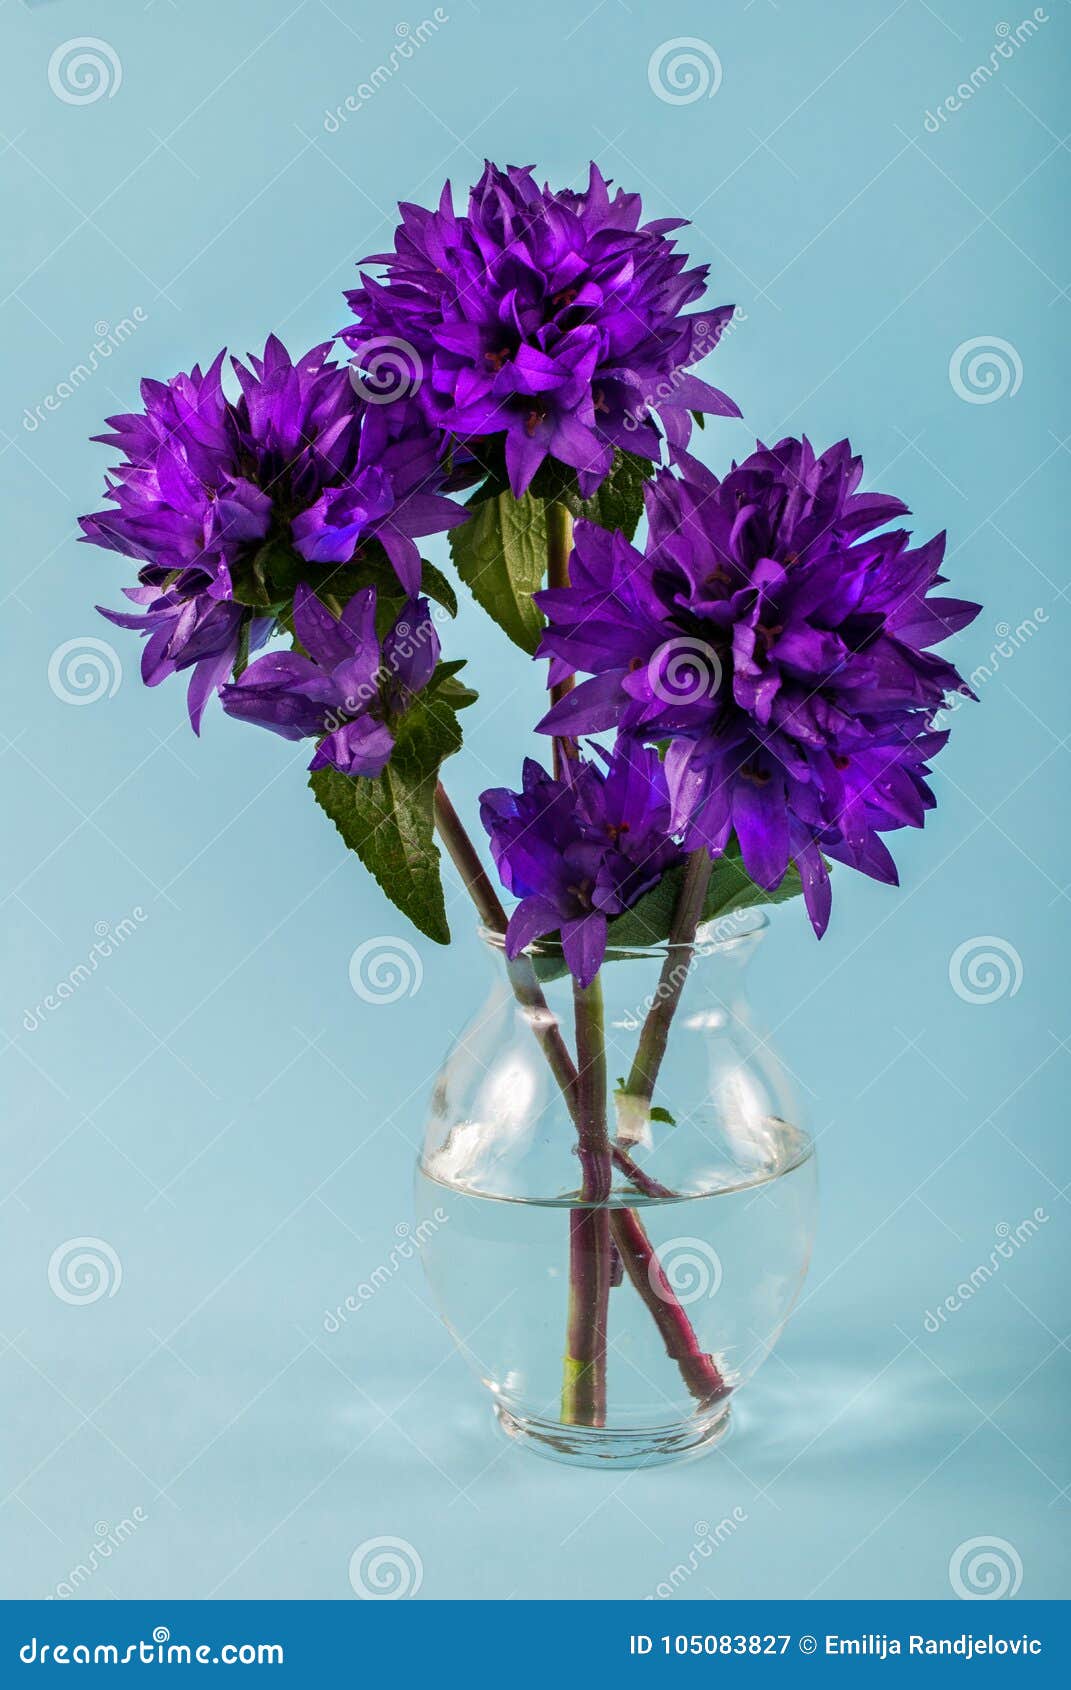 Flowers Violet Color In A Vase On A Blue Background With Space For Text Stock Image Image Of Leaf Color 105083827